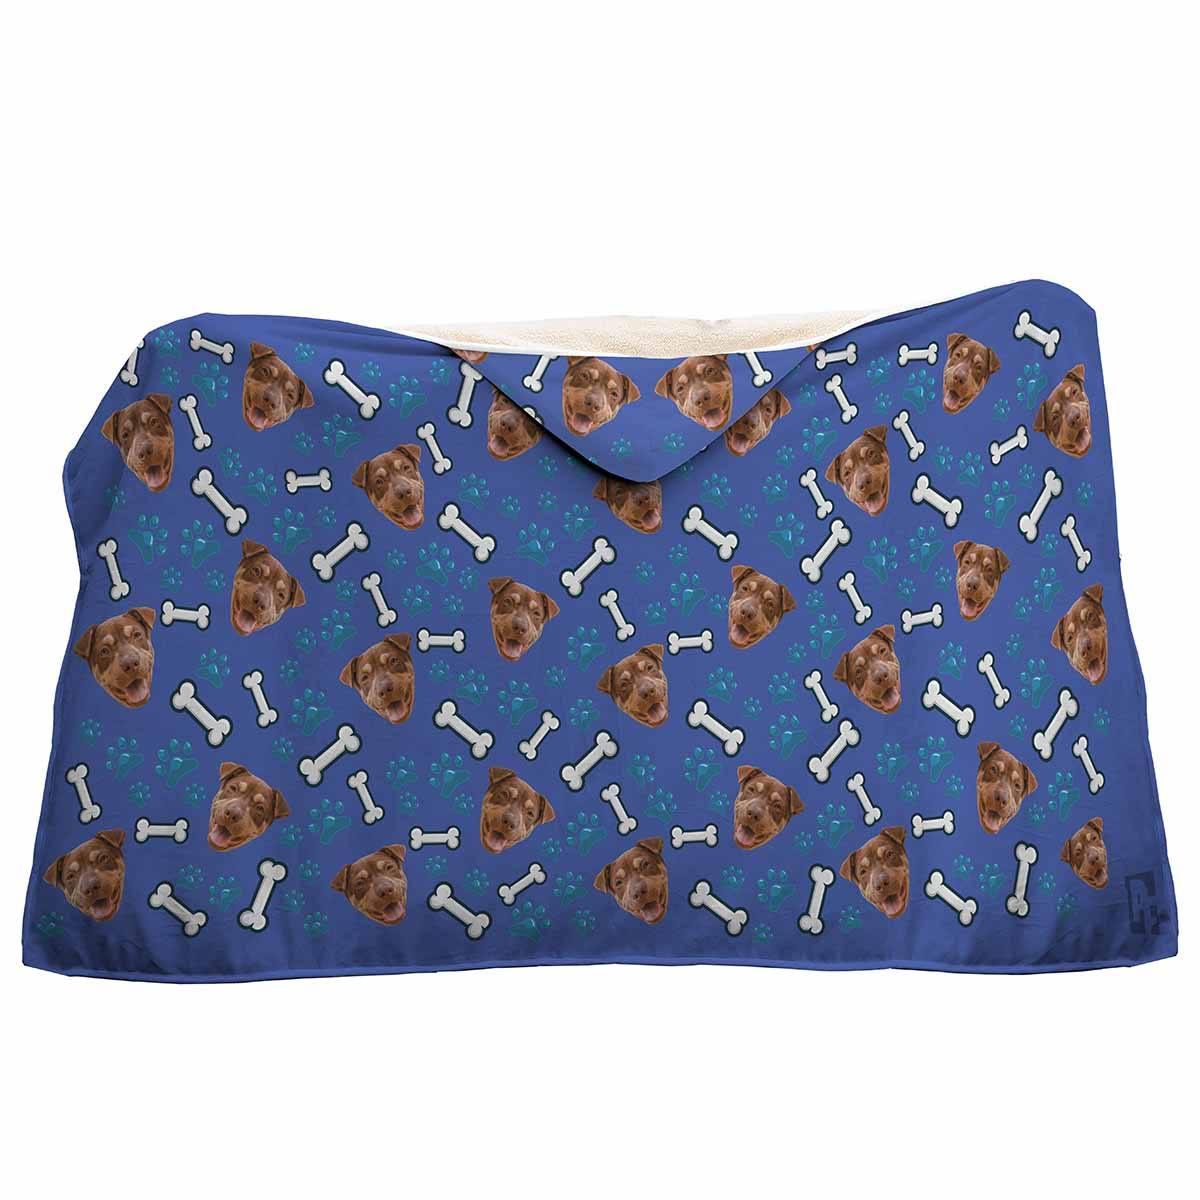 darkblue Dog hooded blanket personalized with photo of face printed on it